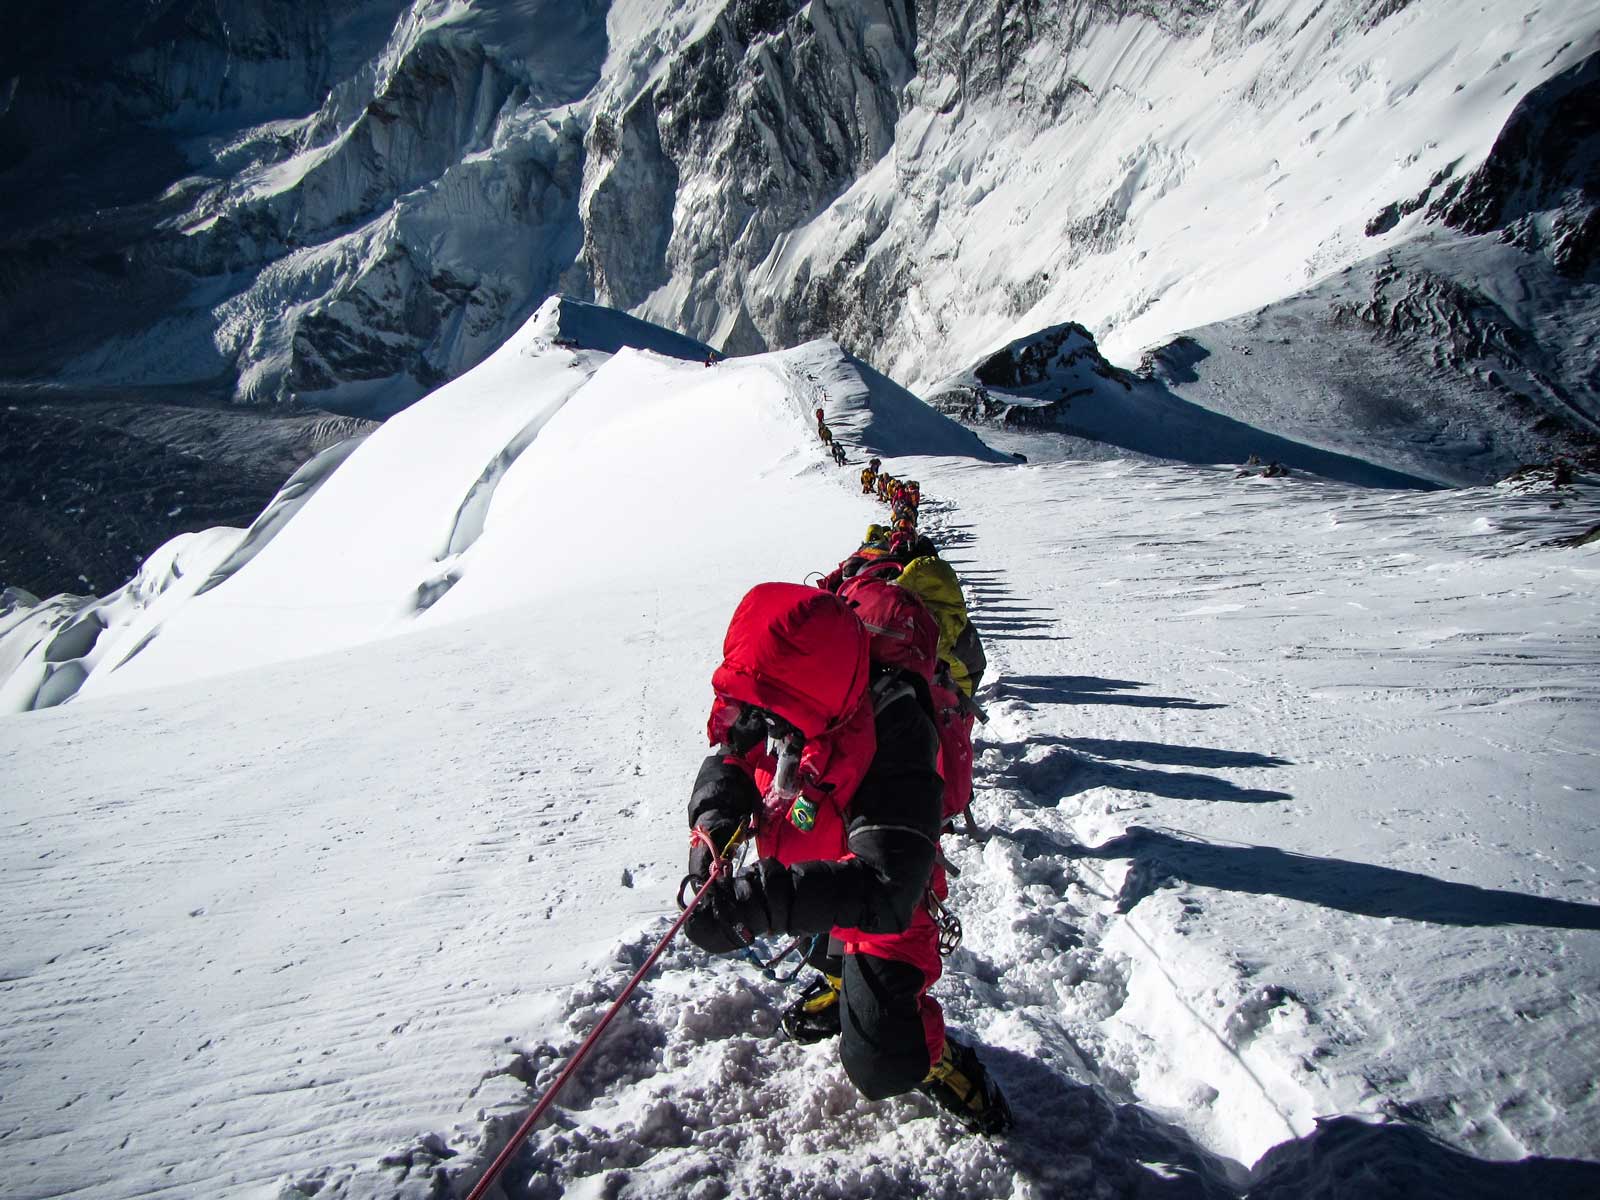 South West Ridge of Everest, Looking down to the South Col